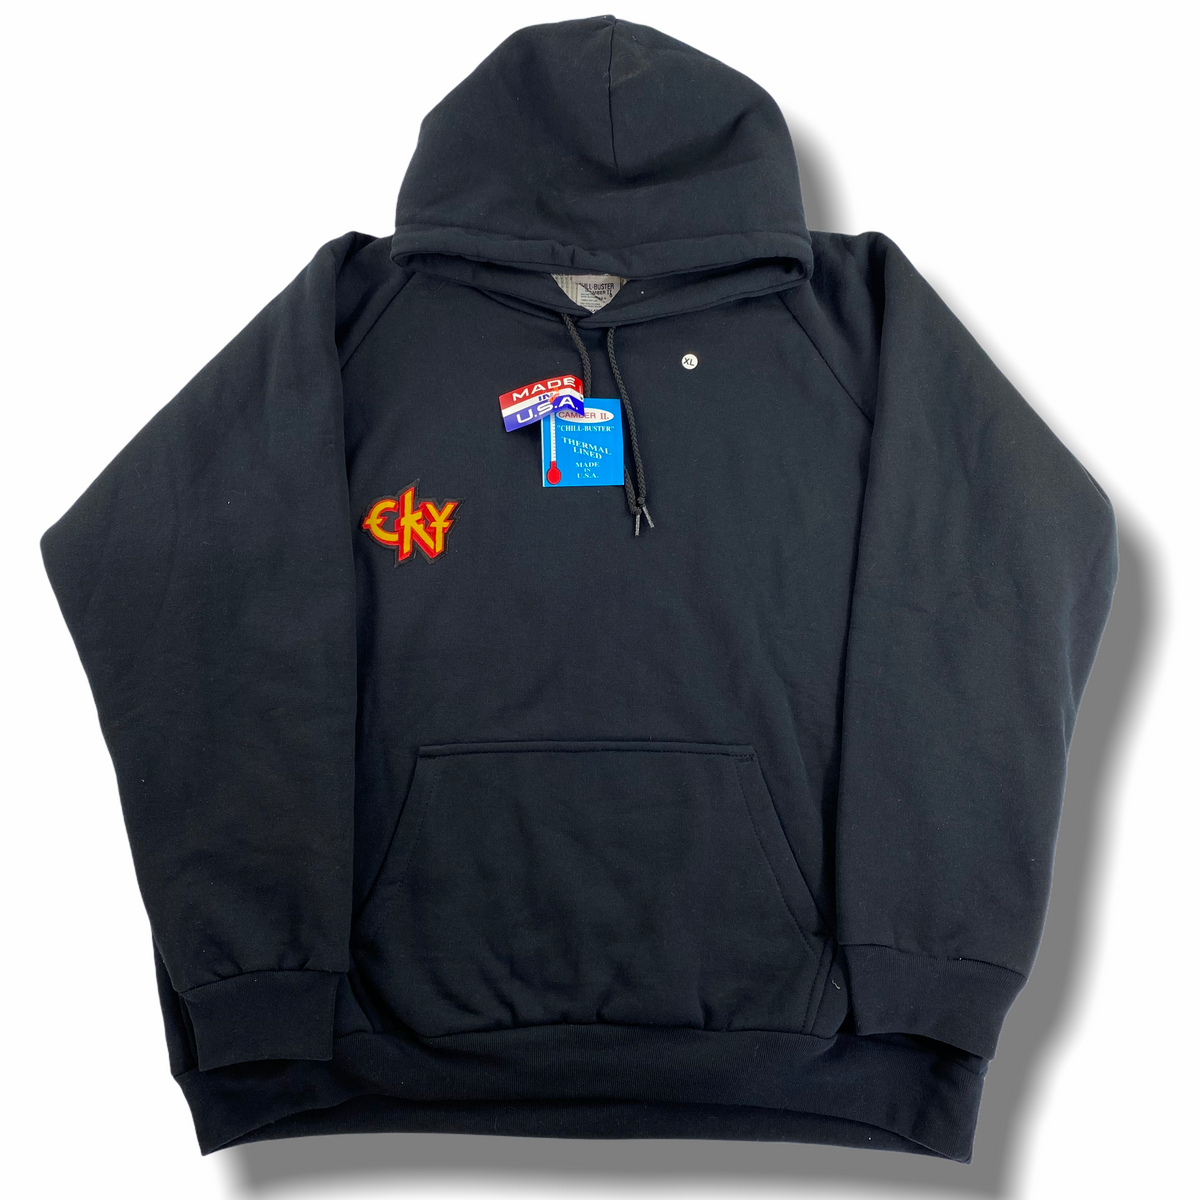 Camber CKY chill buster hooded sweatshirt. XL – Vintage Sponsor